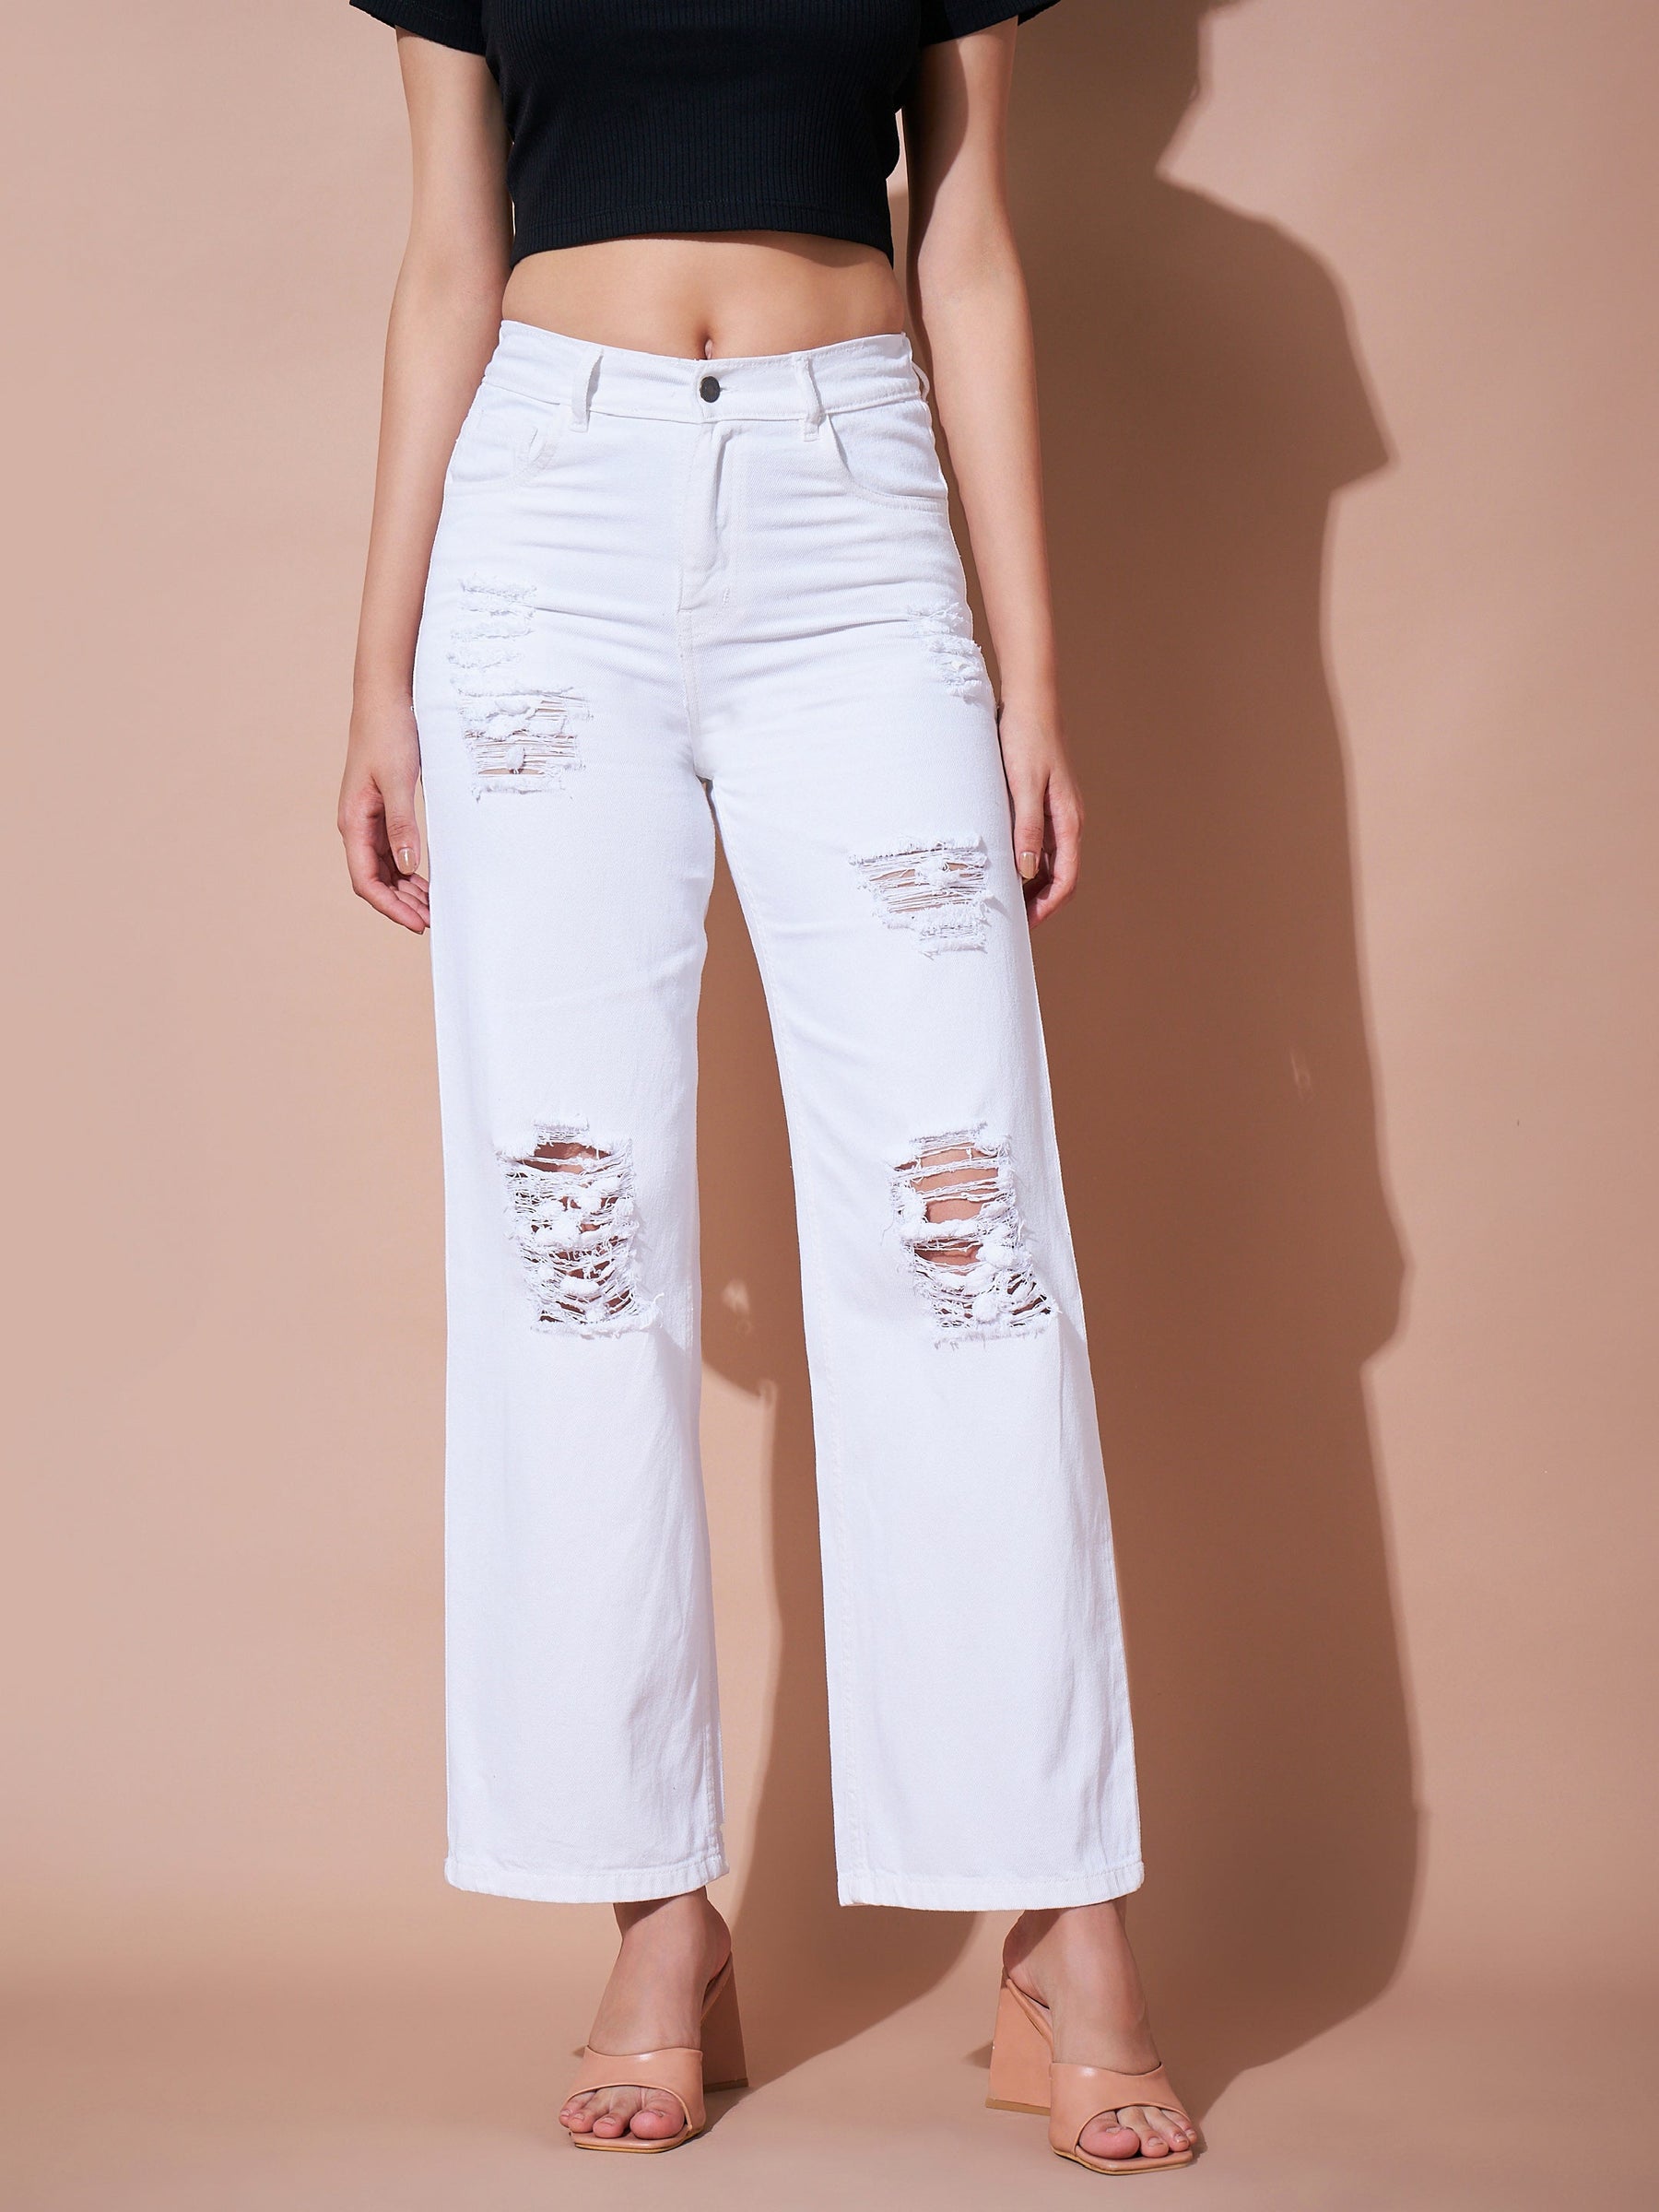 Women White Denim Jeans in Guwahati at best price by Arsh Traders - Justdial